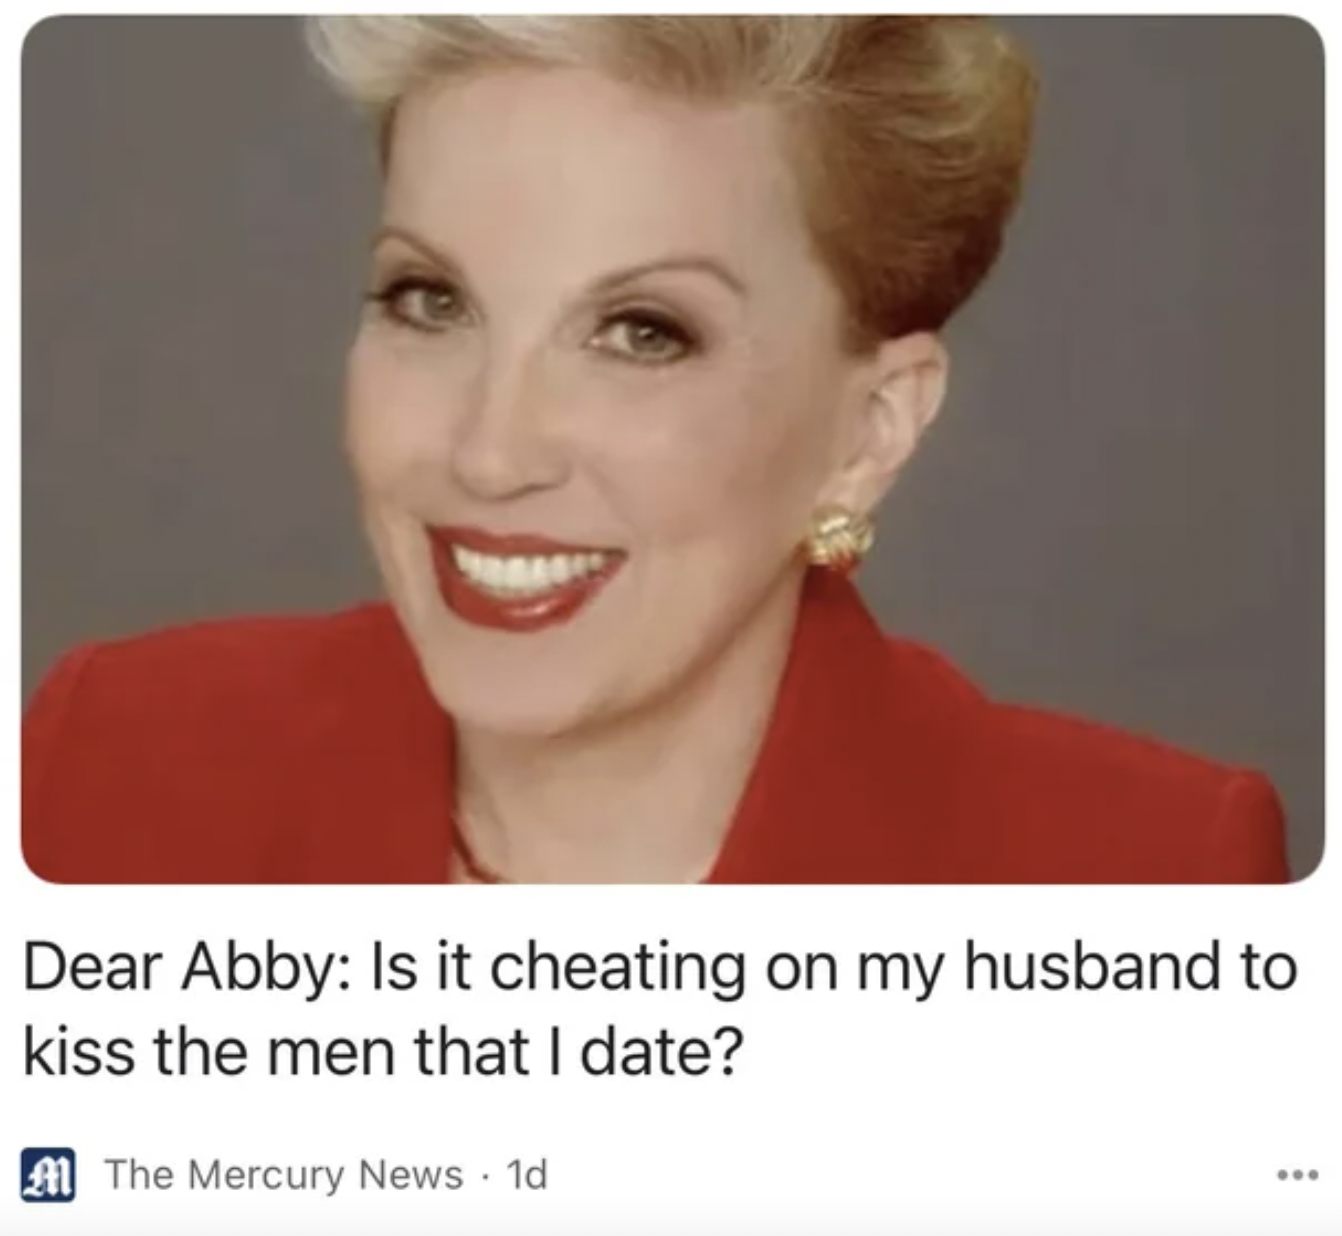 facepalms - dear abby - Dear Abby Is it cheating on my husband to kiss the men that I date? The Mercury News 1d